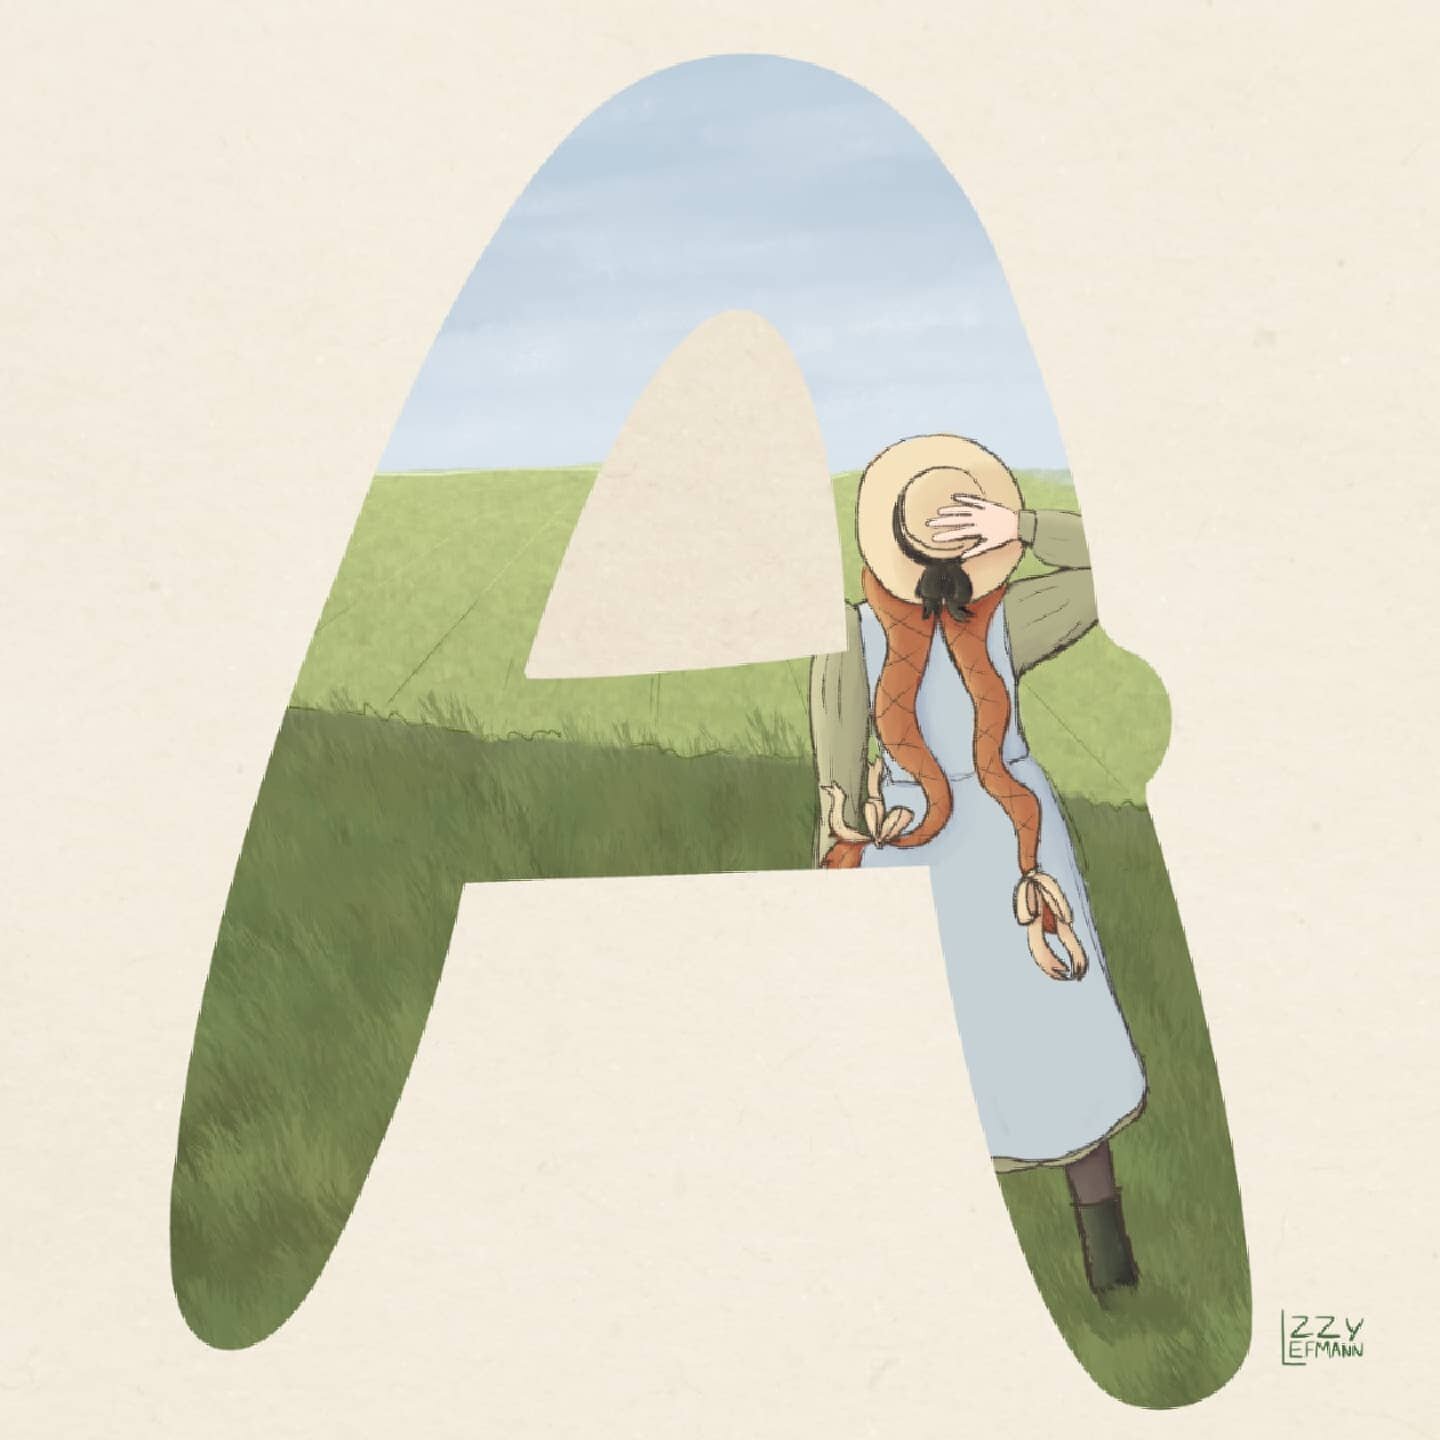 Anne of Green Gables inspired letter 'A'.

@calliecampbellartwork and I have challenged each other to do an alphabet letter a day in June. 
.
#illustration #procreate #illustrator #alphabet #anneofgreengables